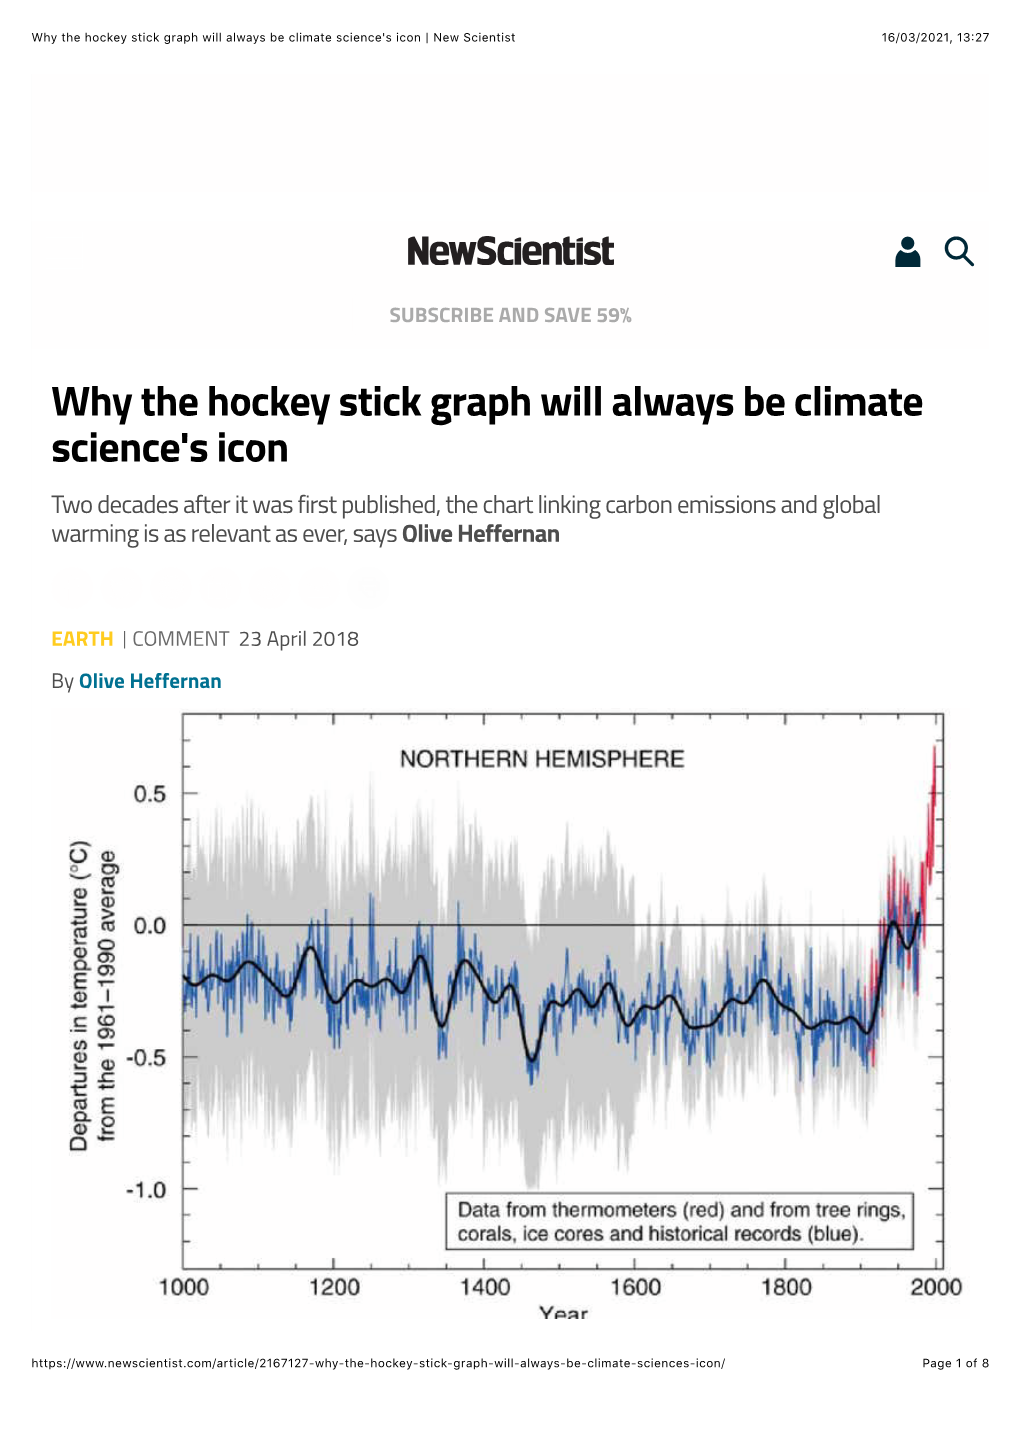 Why the Hockey Stick Graph Will Always Be Climate Science's Icon | New Scientist 16/03/2021, 13:27